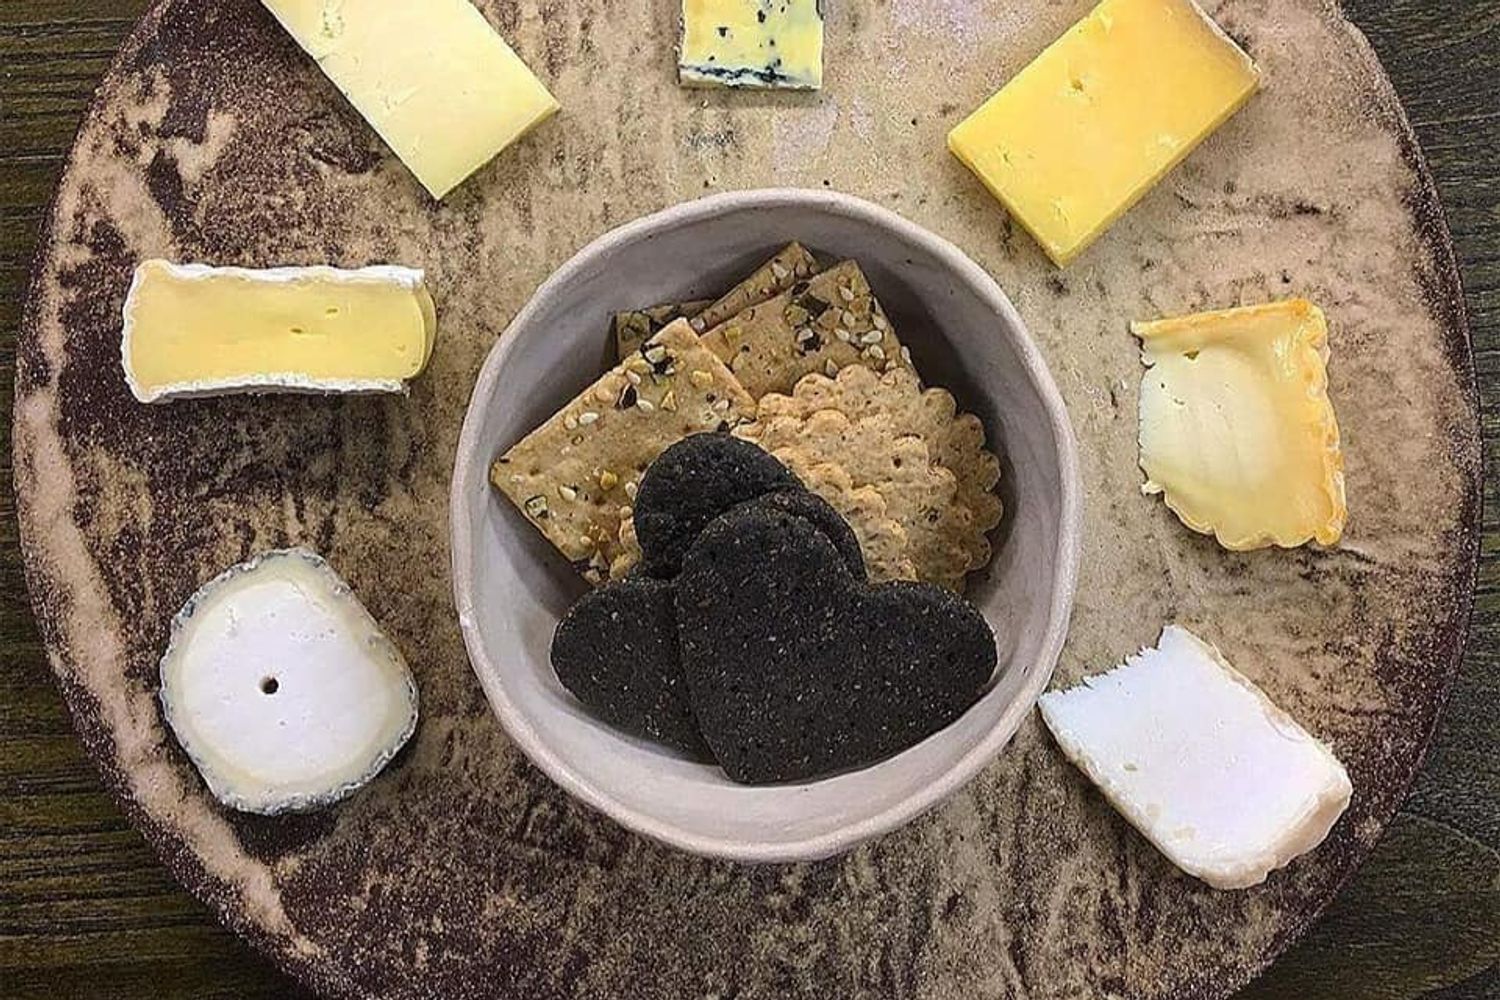 A circular cheese plate with black and brown crackers in a central white dish.